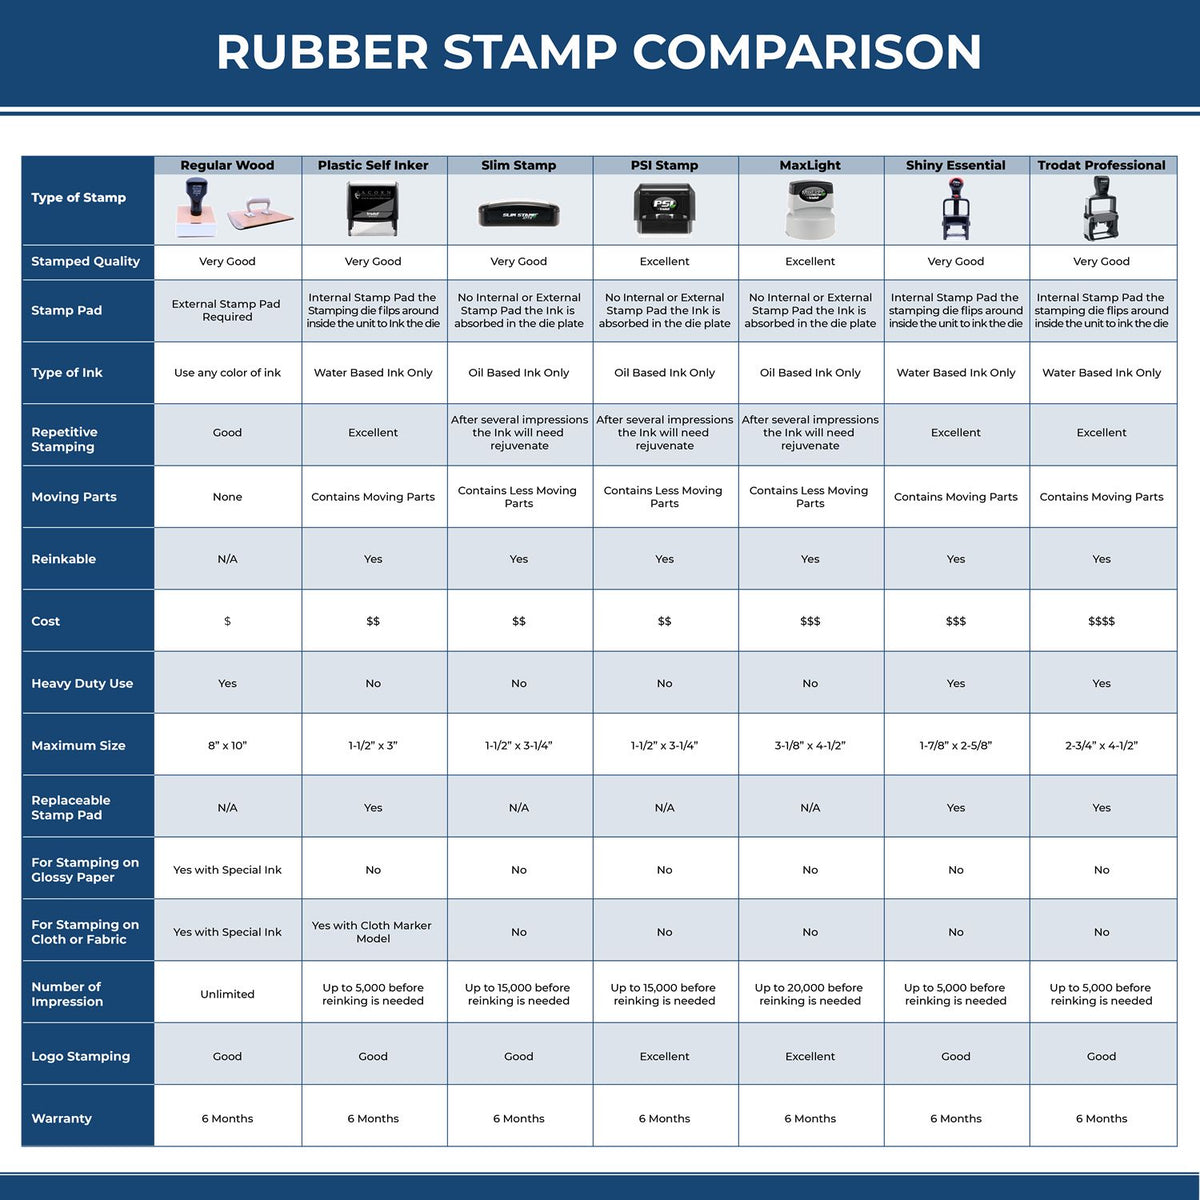 A comparison chart for the different types of mount models available for the Wooden Handle Georgia Rectangular Notary Public Stamp.